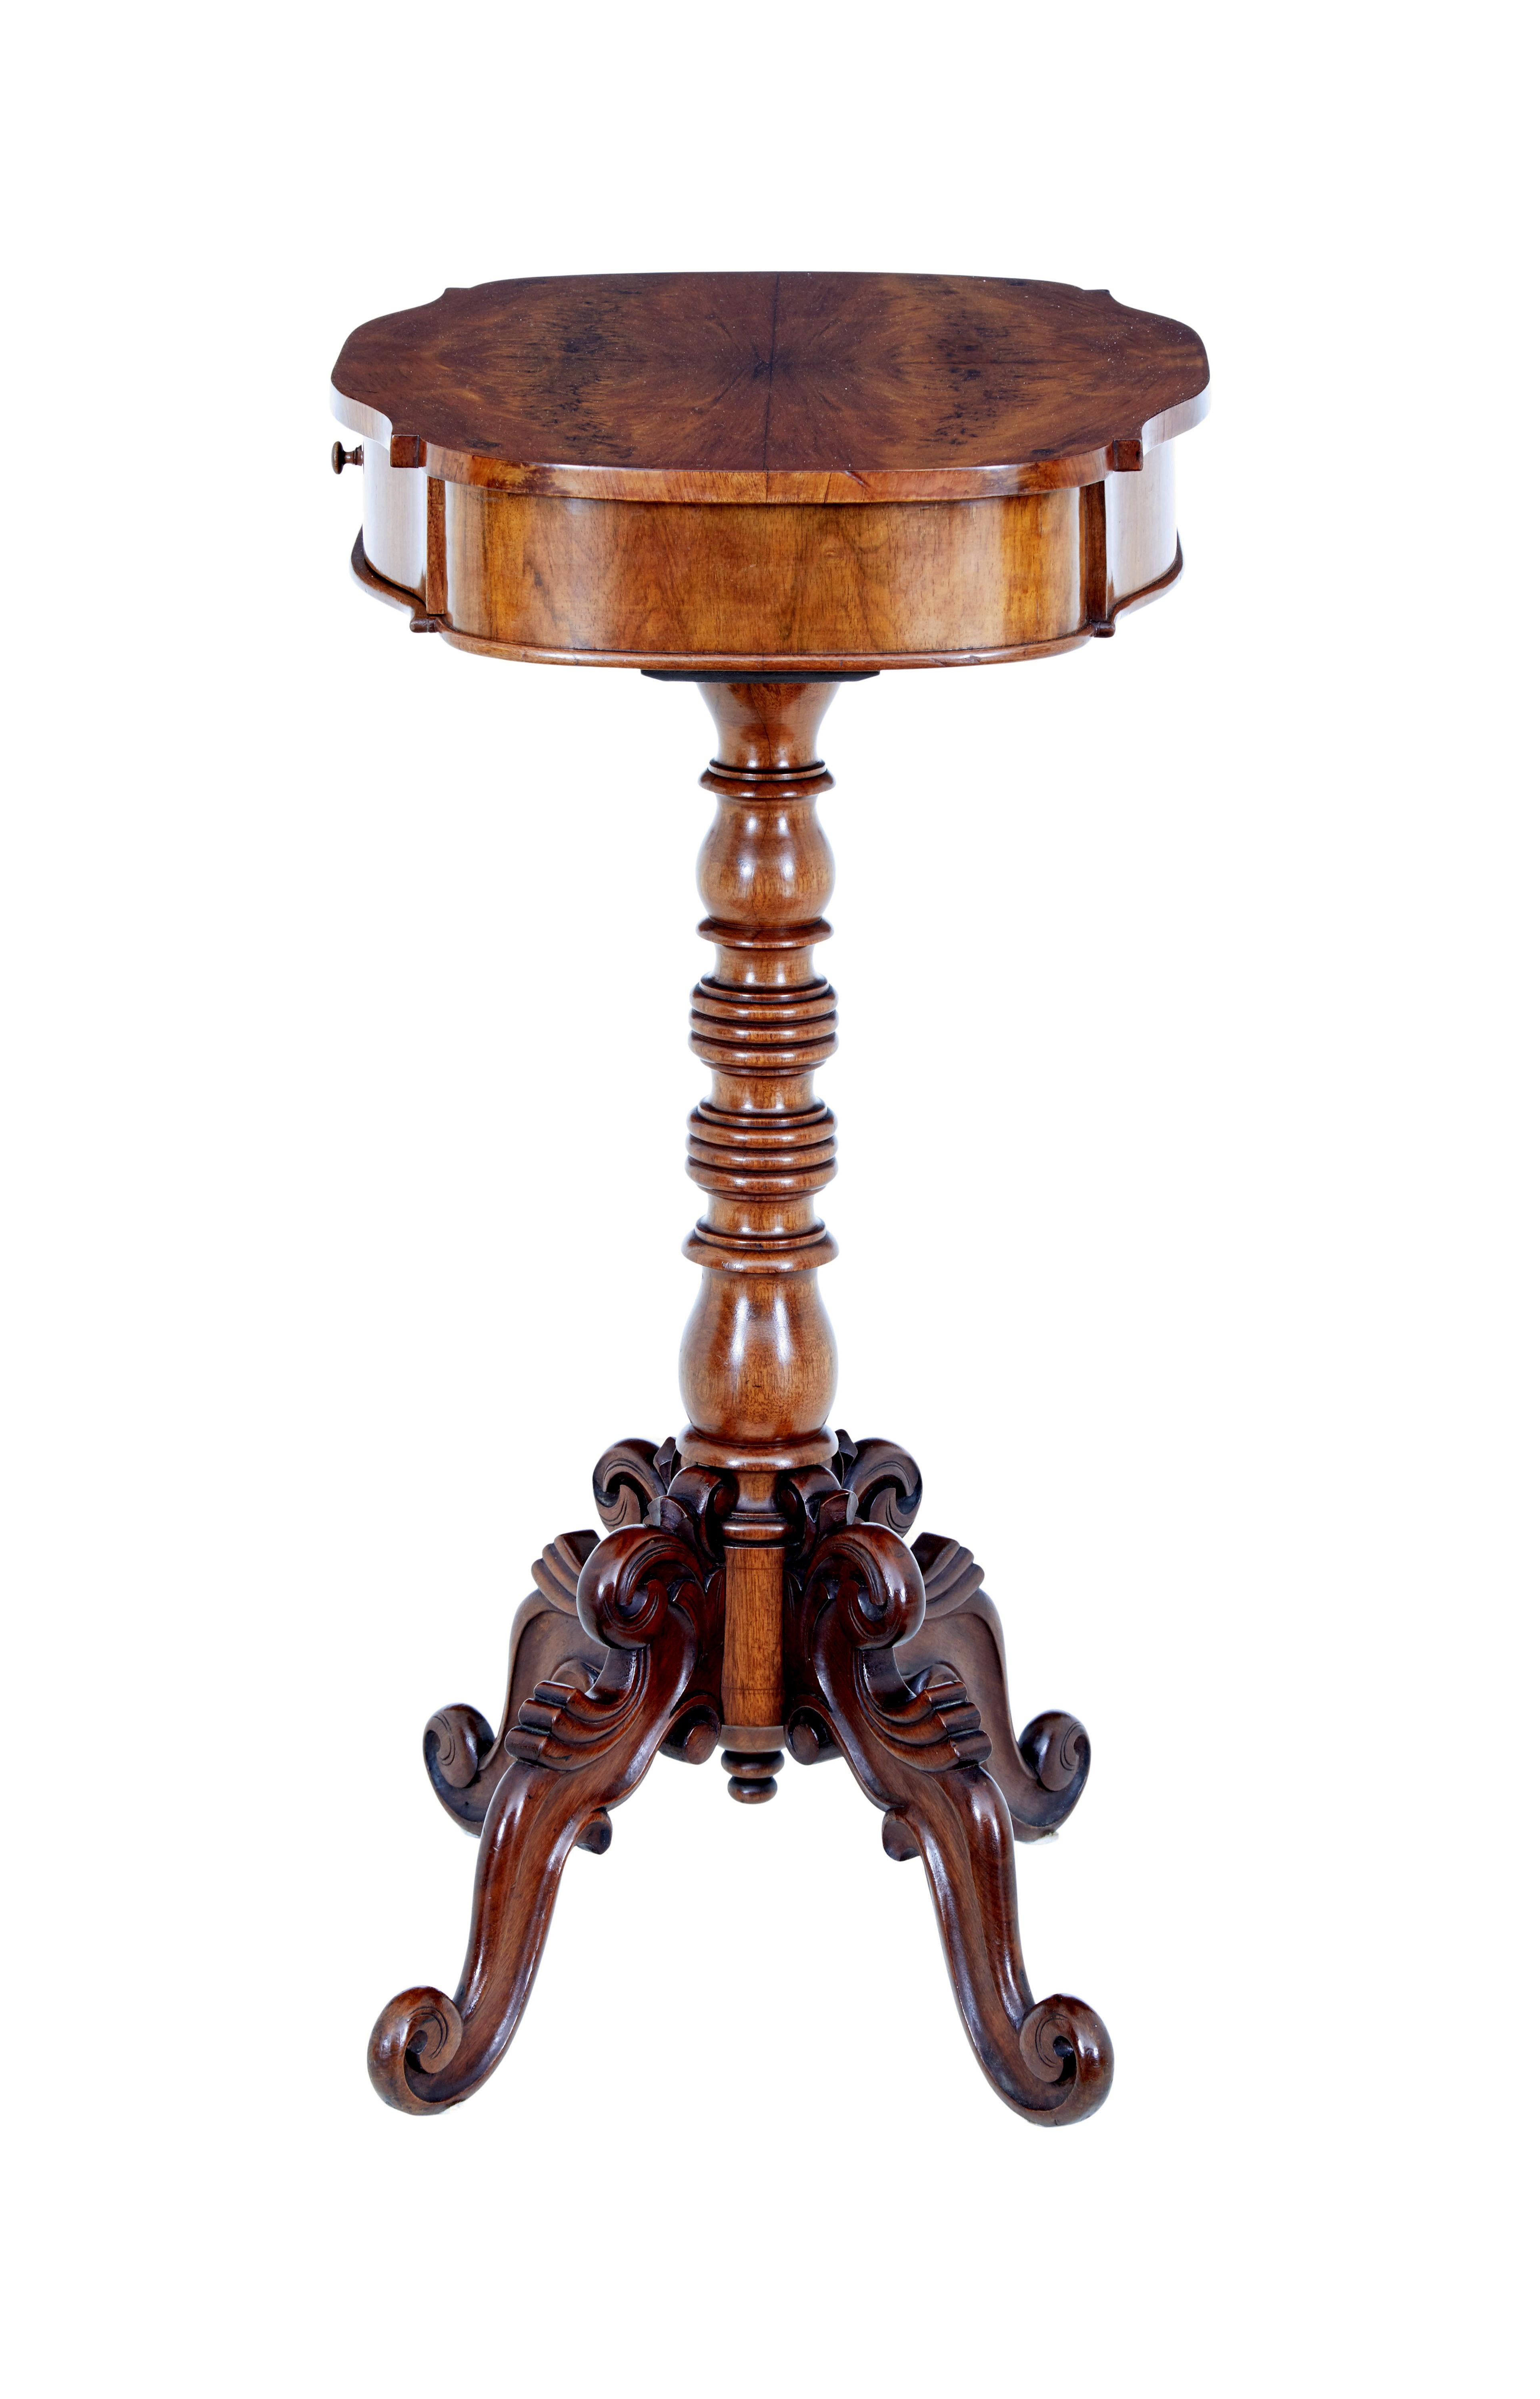 19th century Carved flame mahogany side table, circa 1890.

Fine quality shaped top surface with matched flame mahogany veneers.  Single drawer for storage.  Turned column support which links to the 4 carved scrolling legs.

Ideal for a lamp or